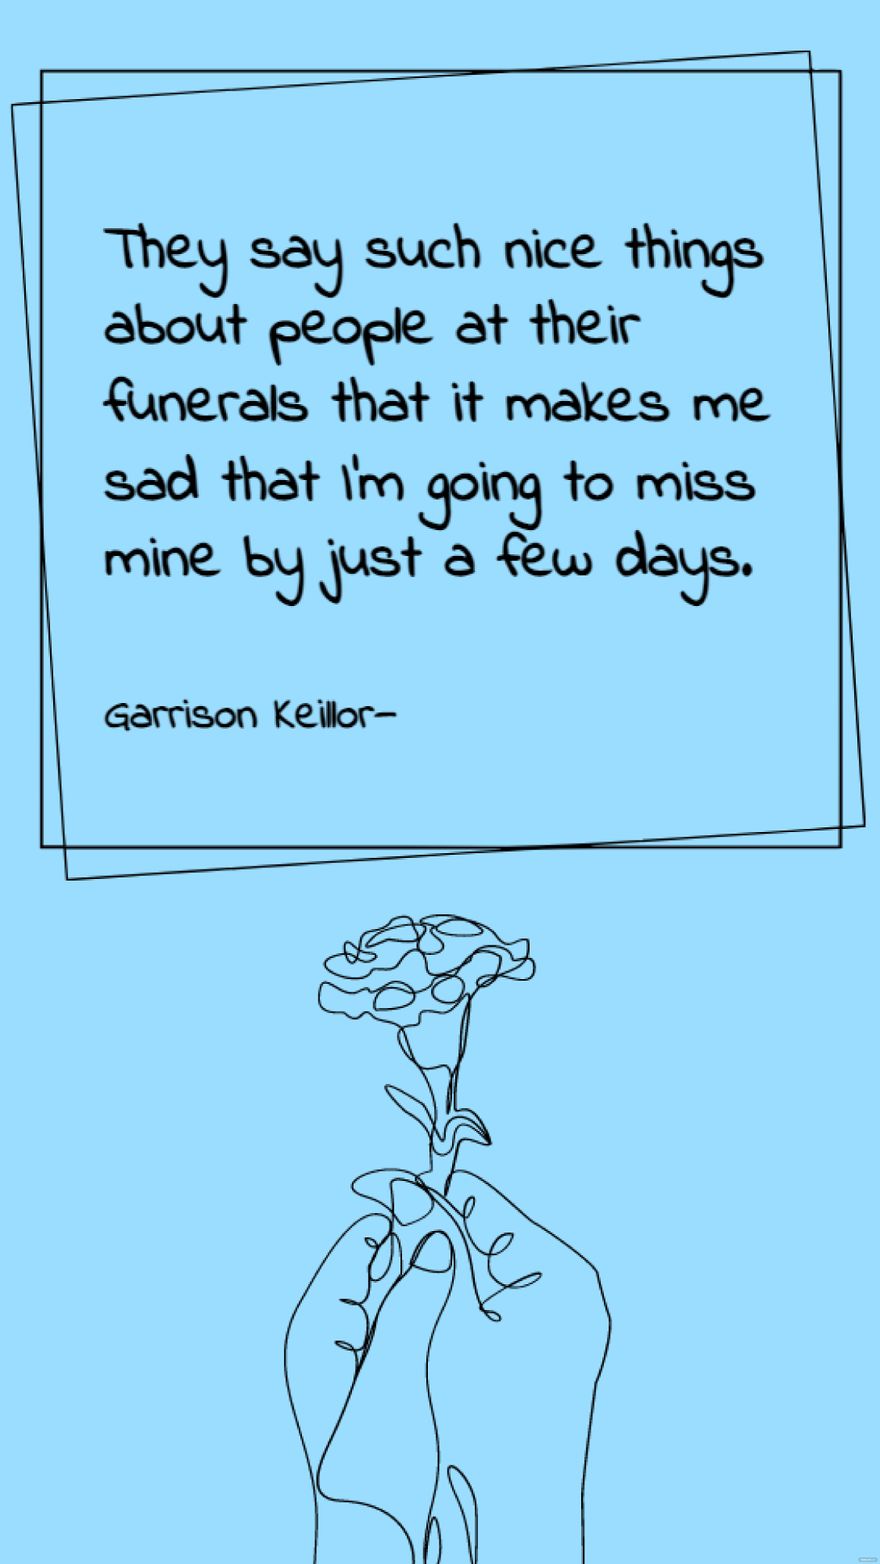 Garrison Keillor - They say such nice things about people at their funerals that it makes me sad that I'm going to miss mine by just a few days.